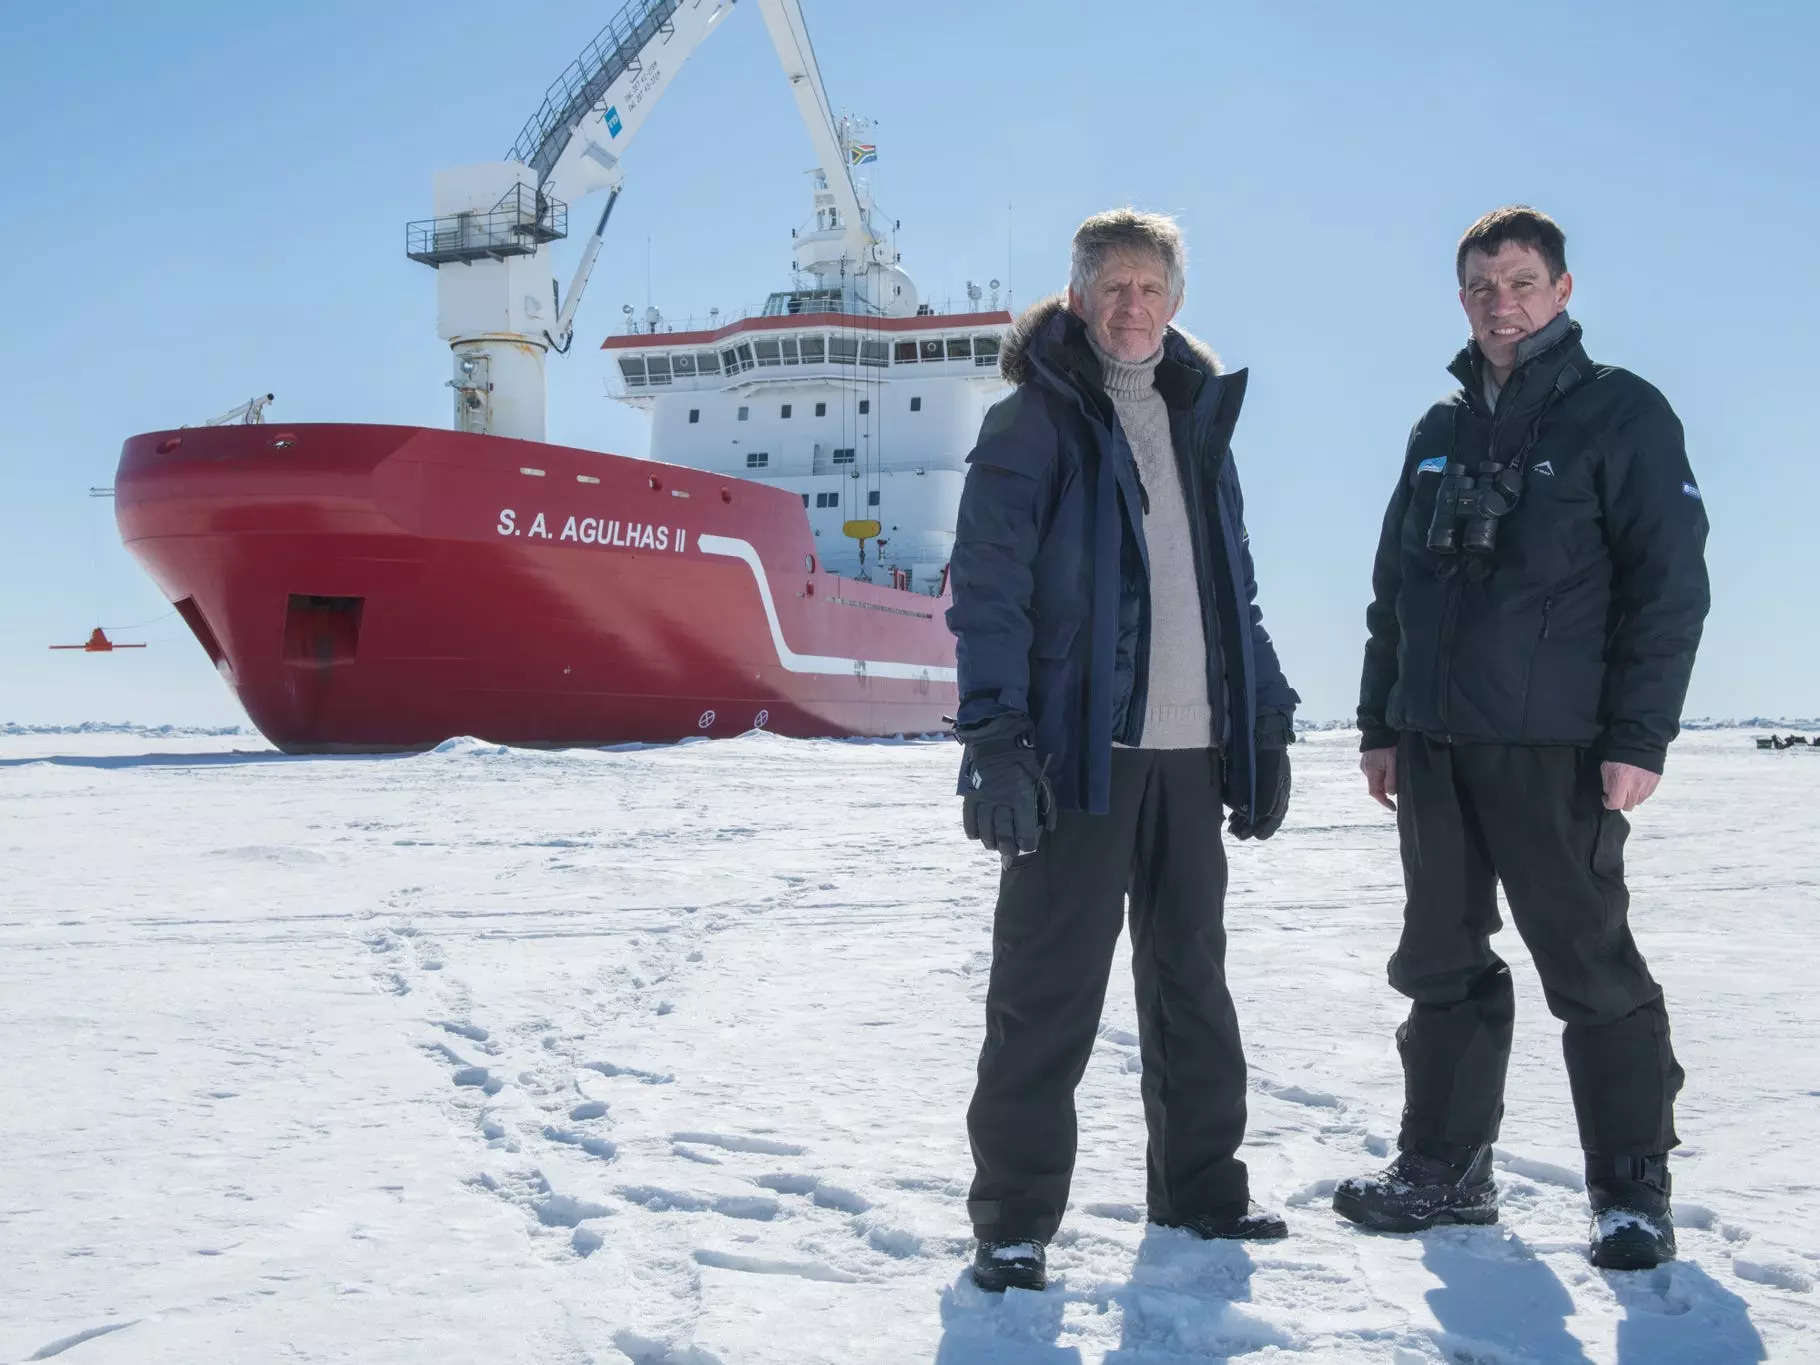 Mensun Bound, left, director of exploration, and John Shears, the expedition leader.Credit...